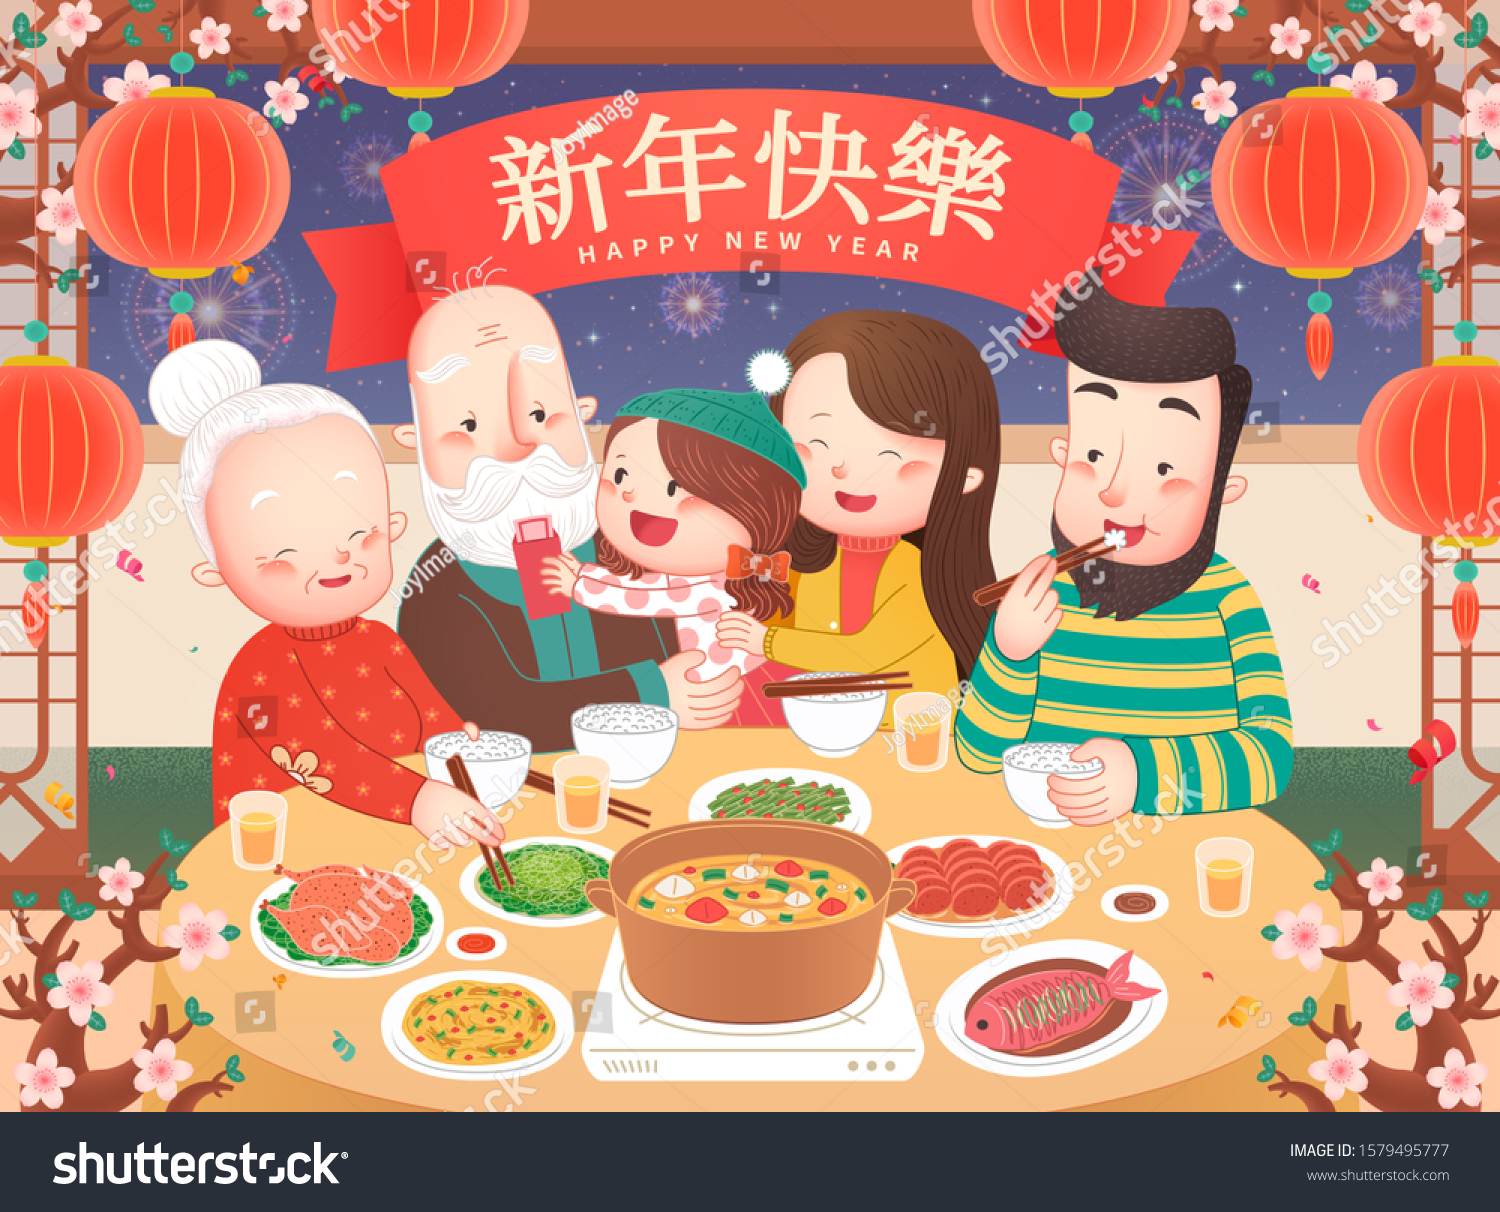 SVG of Family reunion dinner with delicious traditional cuisine, Chinese text translation: Happy new year svg